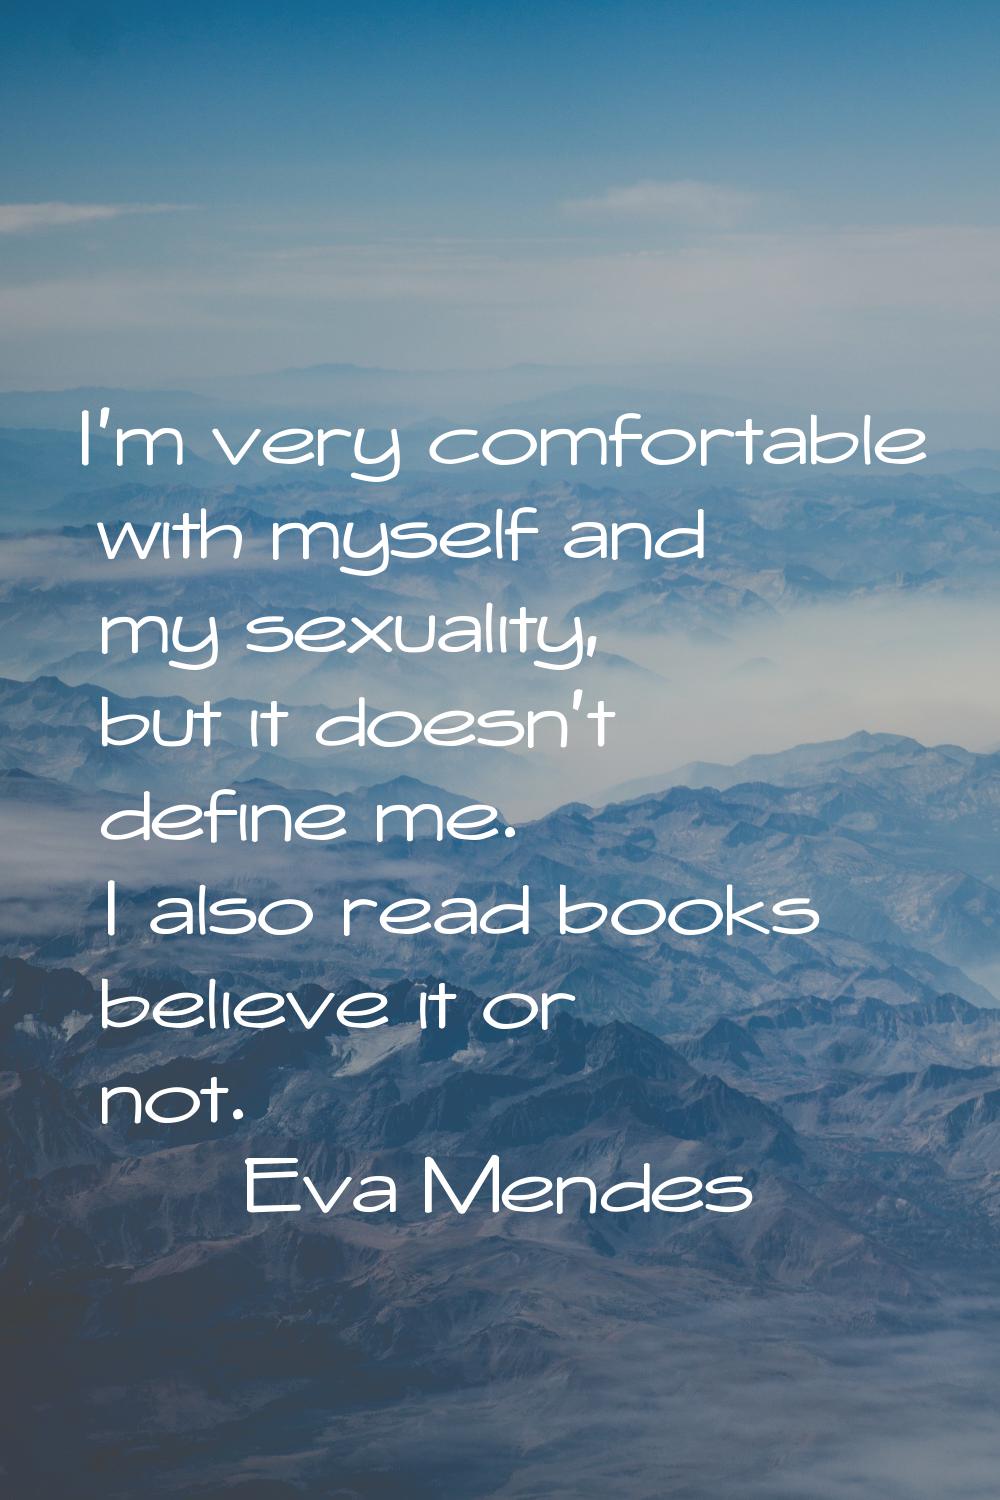 I'm very comfortable with myself and my sexuality, but it doesn't define me. I also read books beli